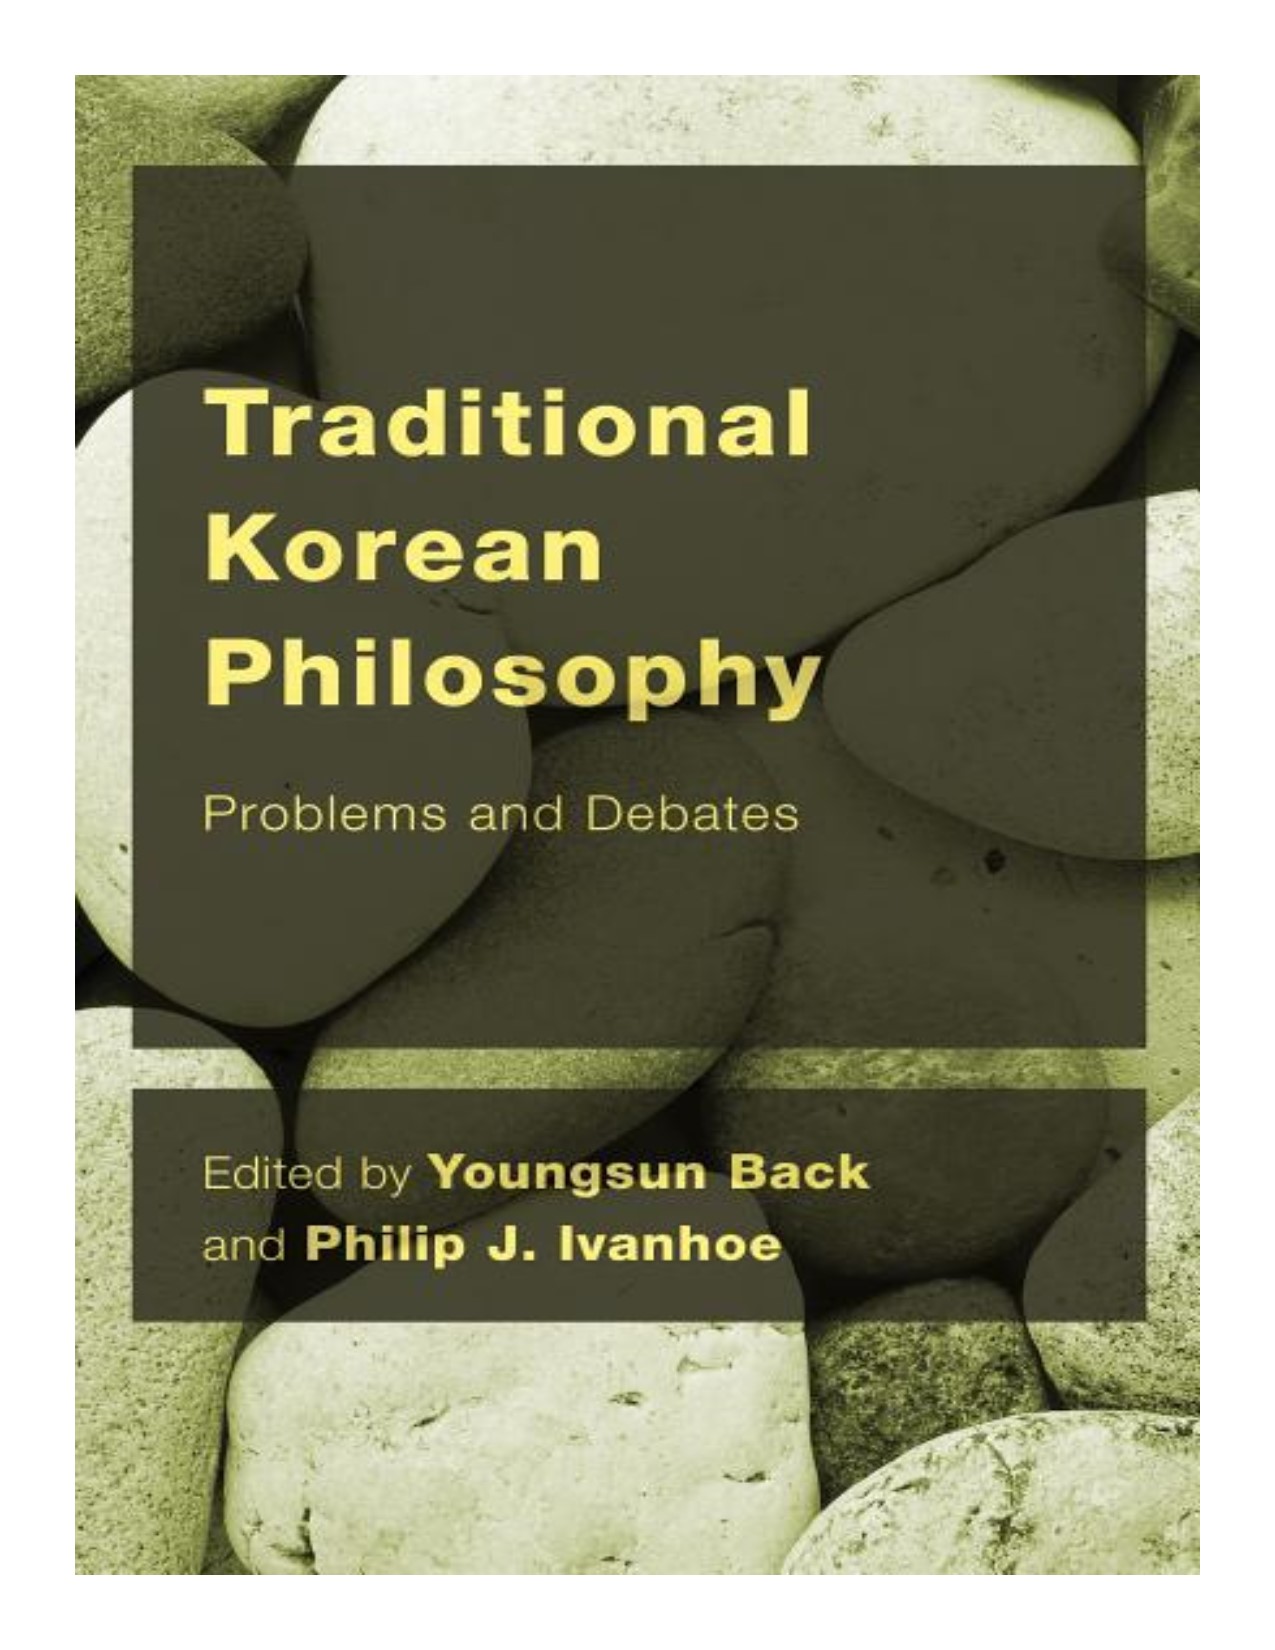 Traditional Korean philosophy problems and debates